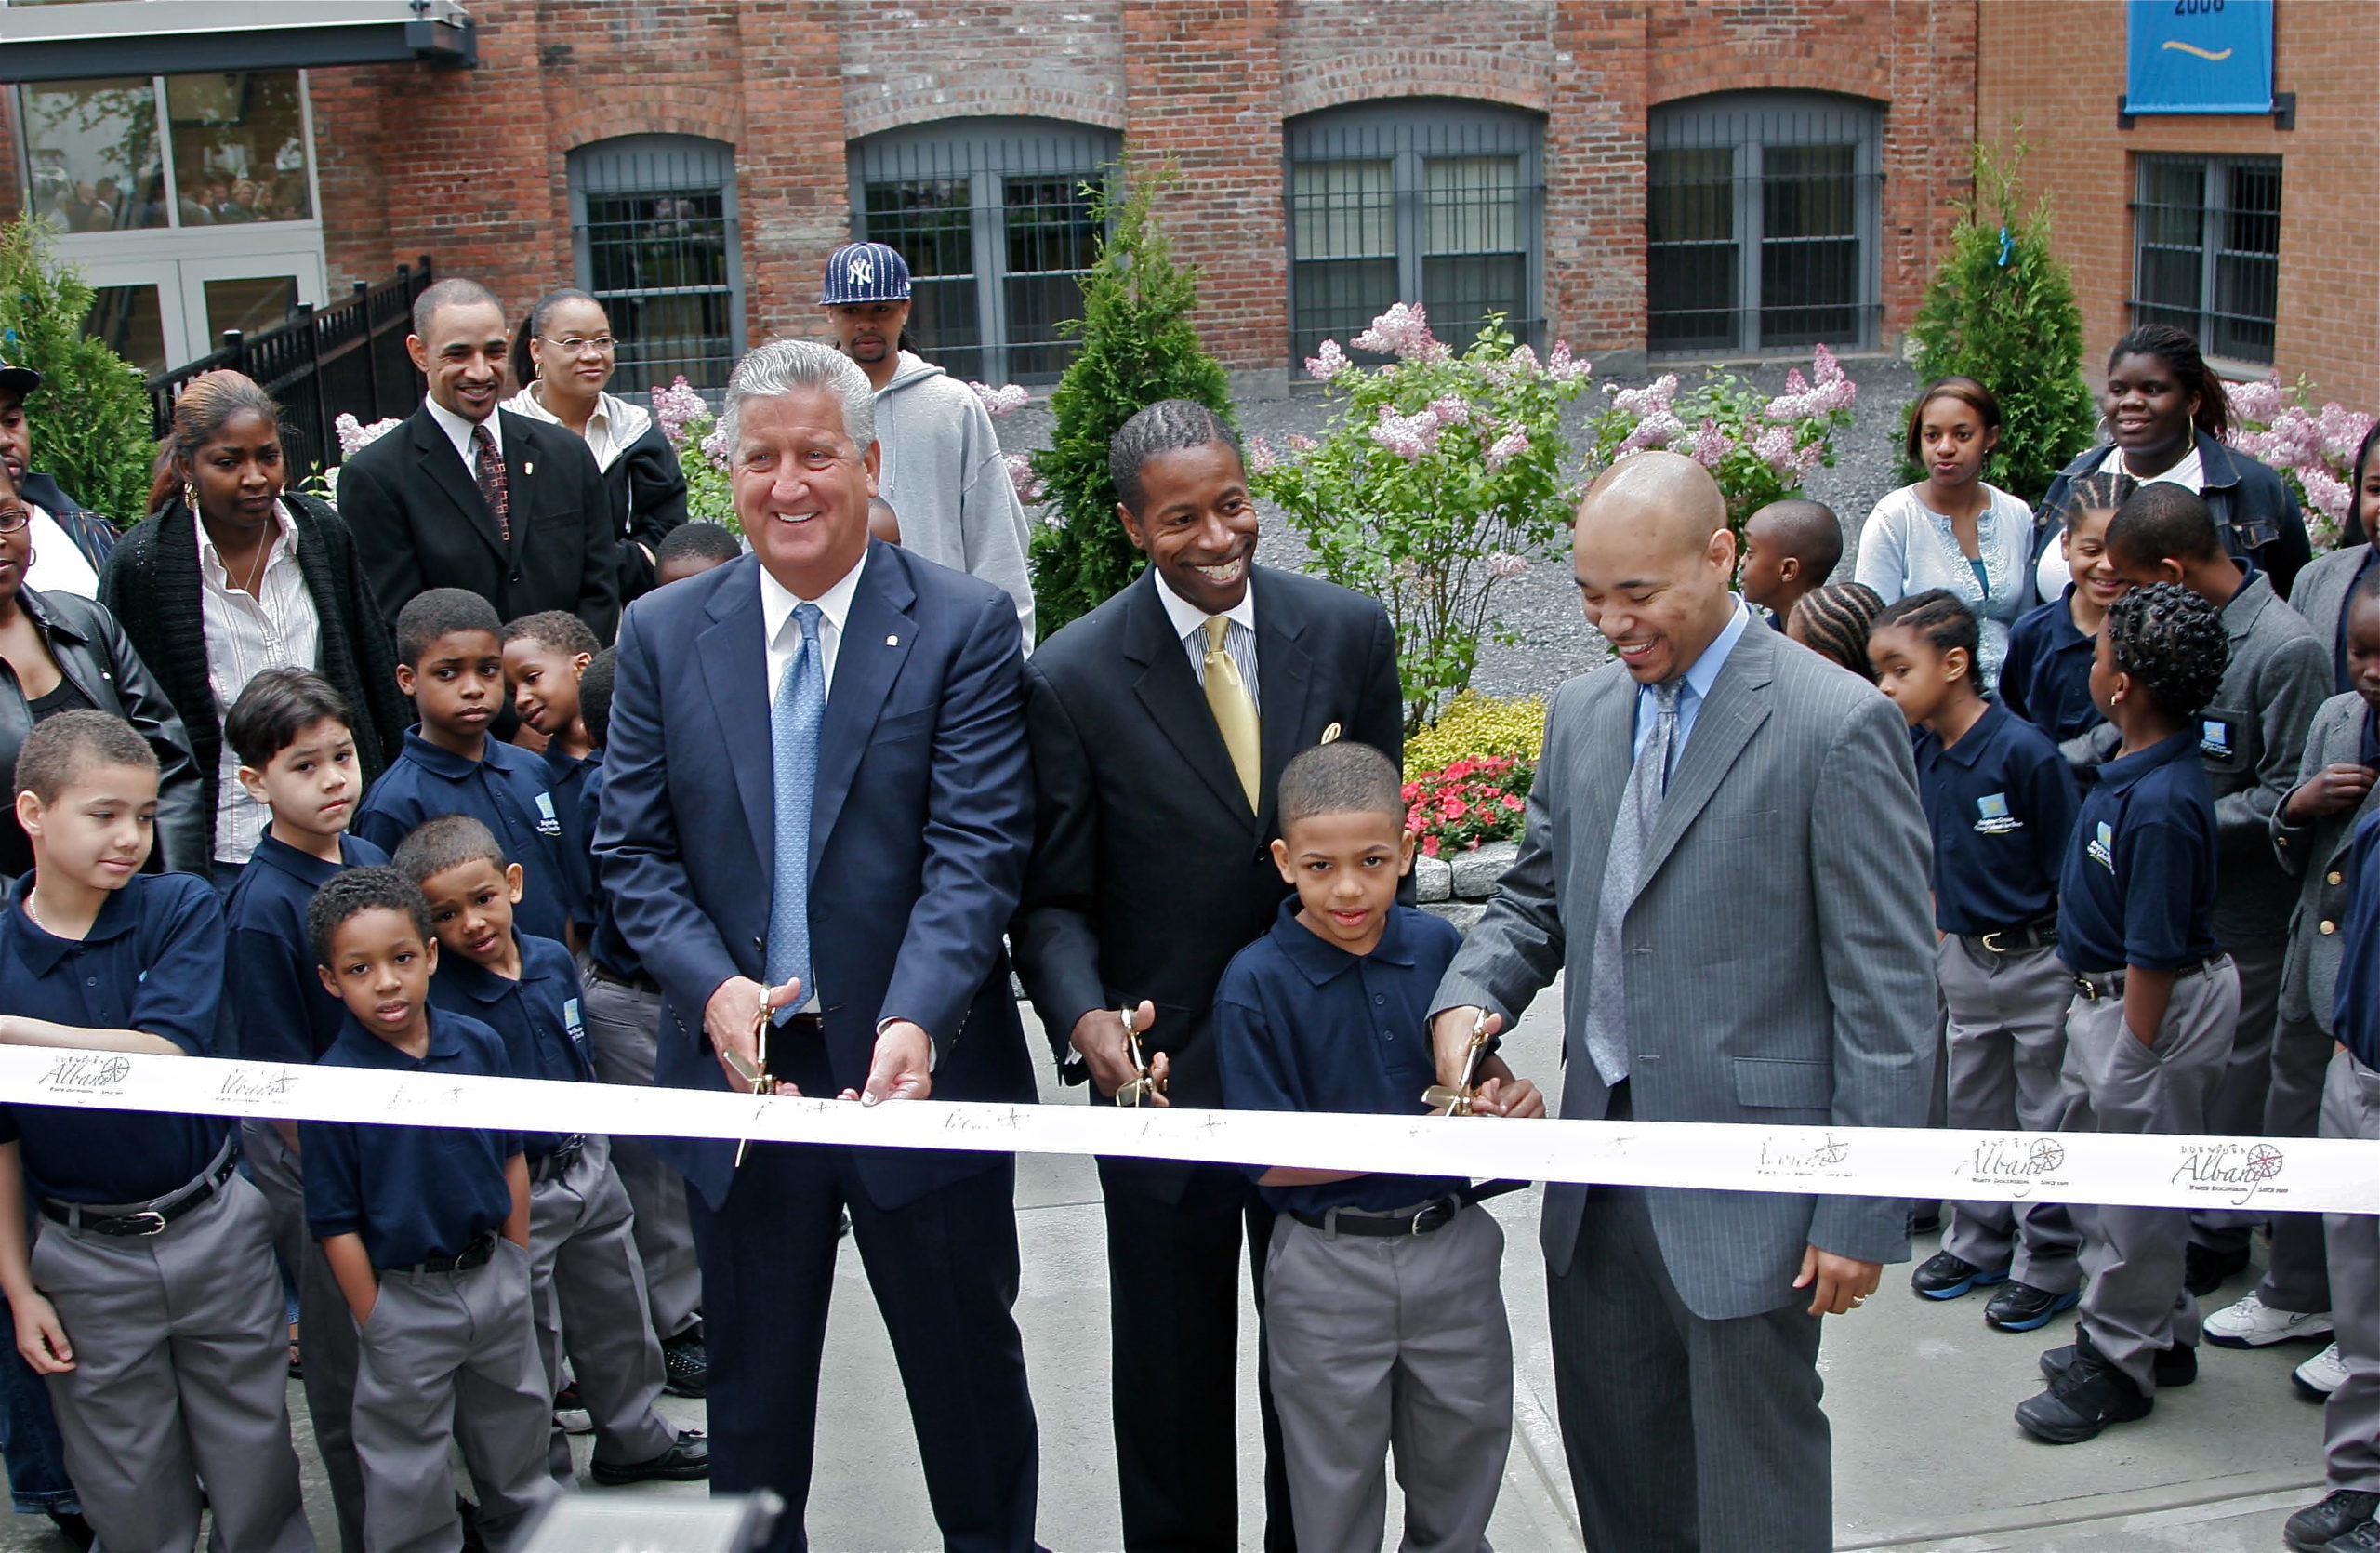 Ribbon cutting for Brighter Choice boys school with Albany Mayor Jerry Jennings and Senate Majority Leader Malcolm Smith[1]